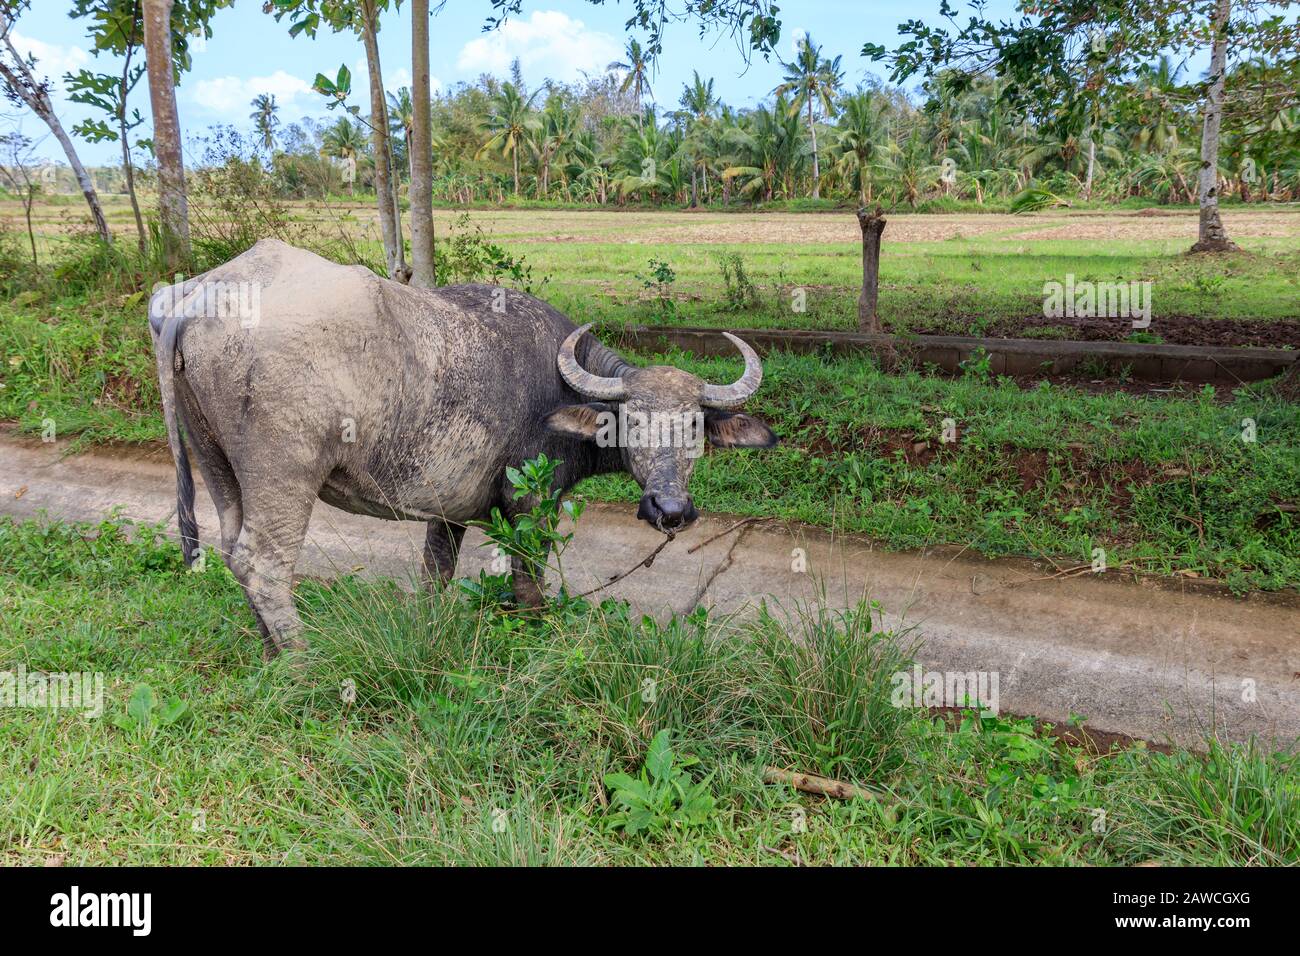 A Carabao in TabonTabon, Leyte, Philippines Stock Photo